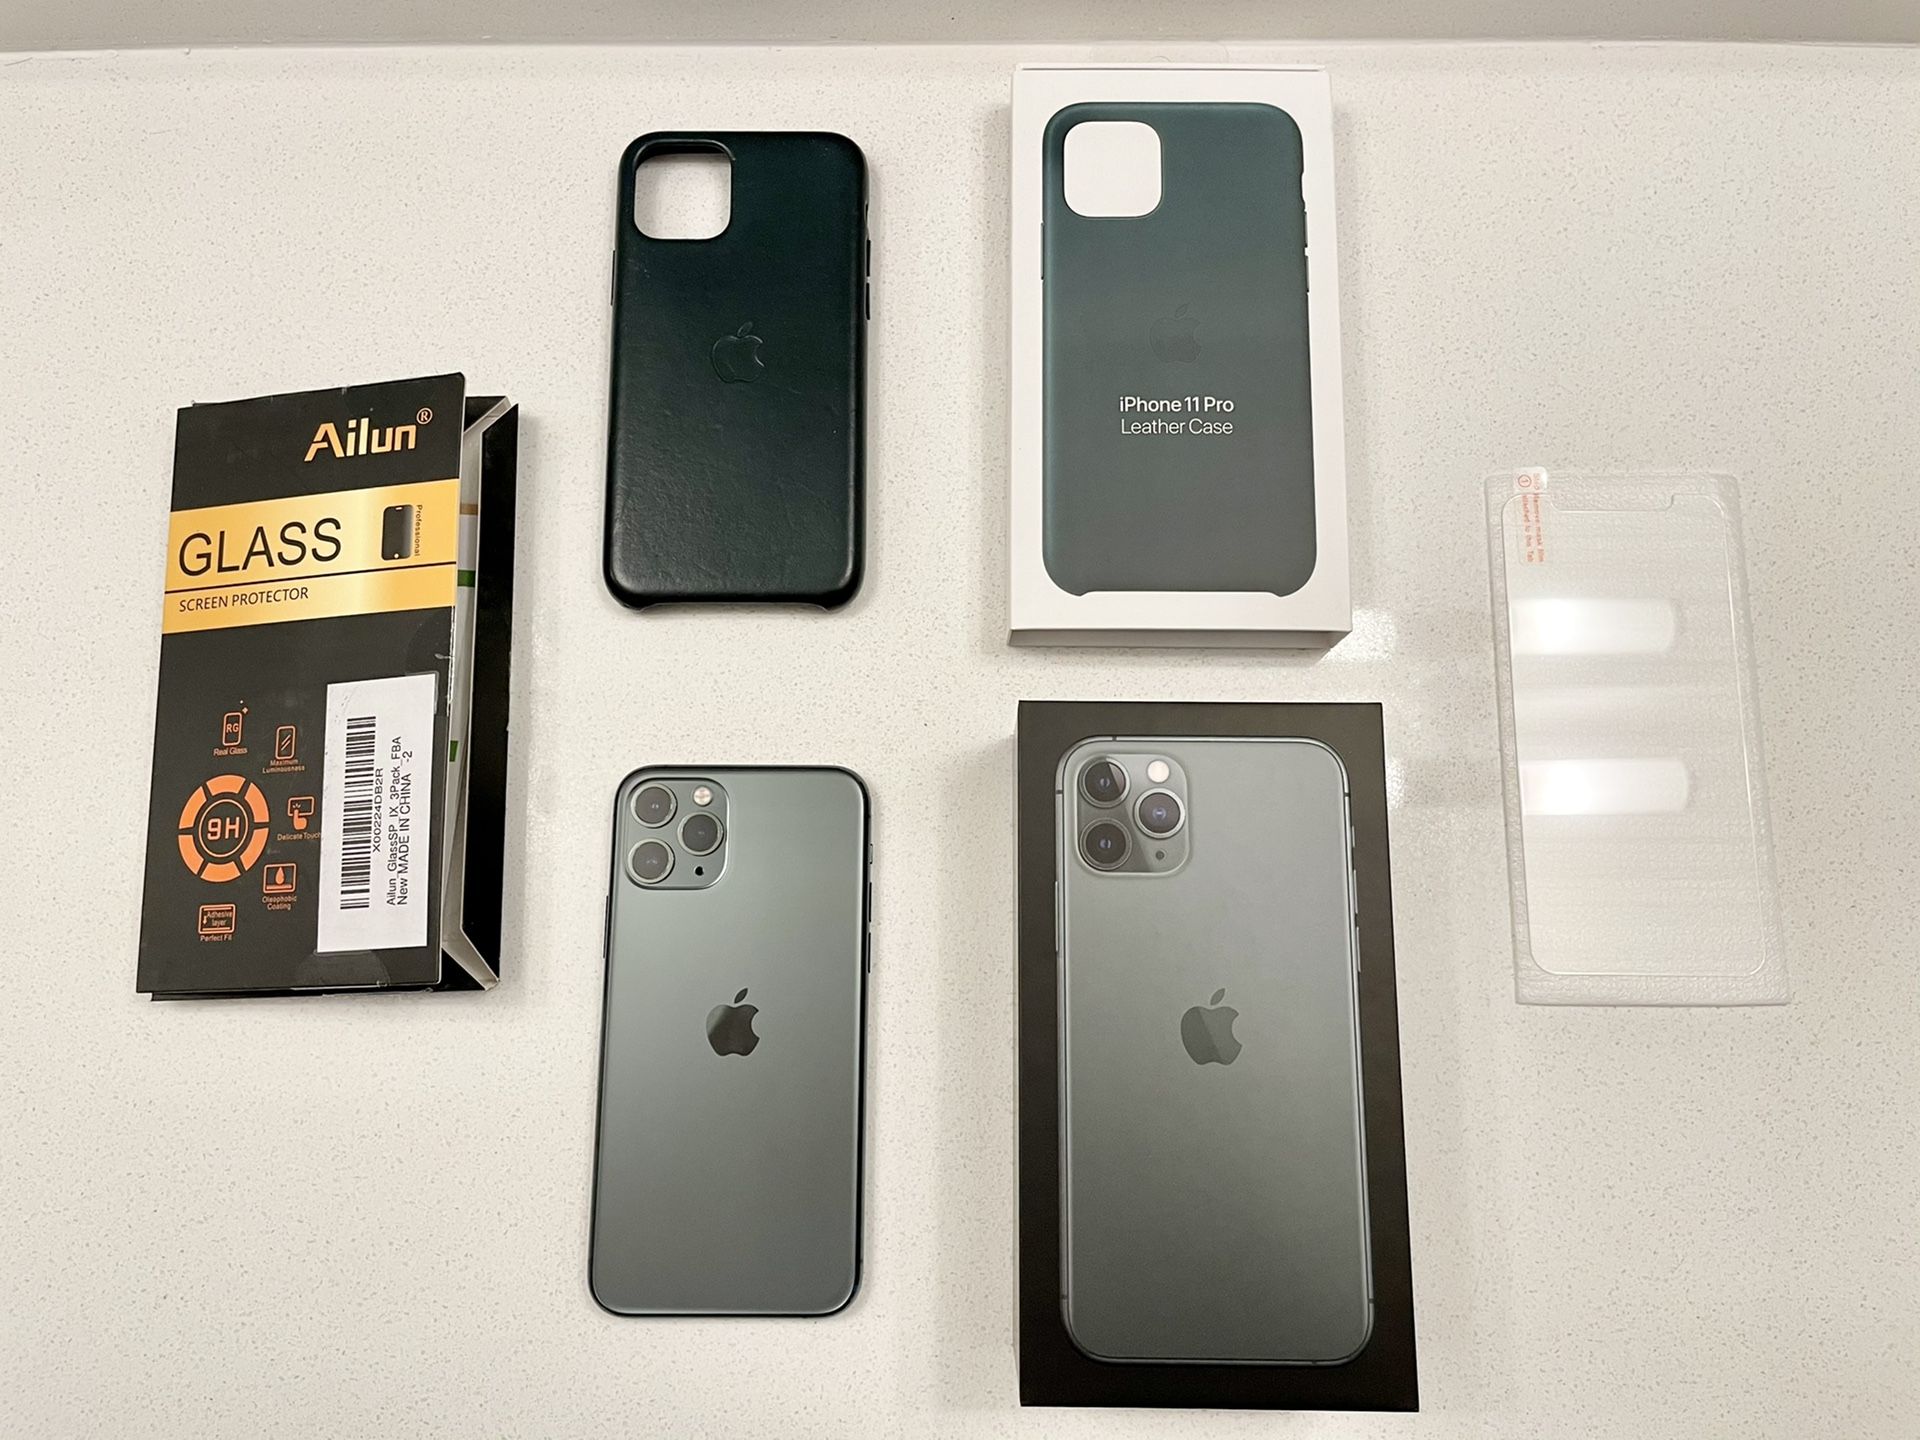 iPhone 11 Pro Midnight Green 64GB Unlocked + Apple Leather Case + Screen Protector